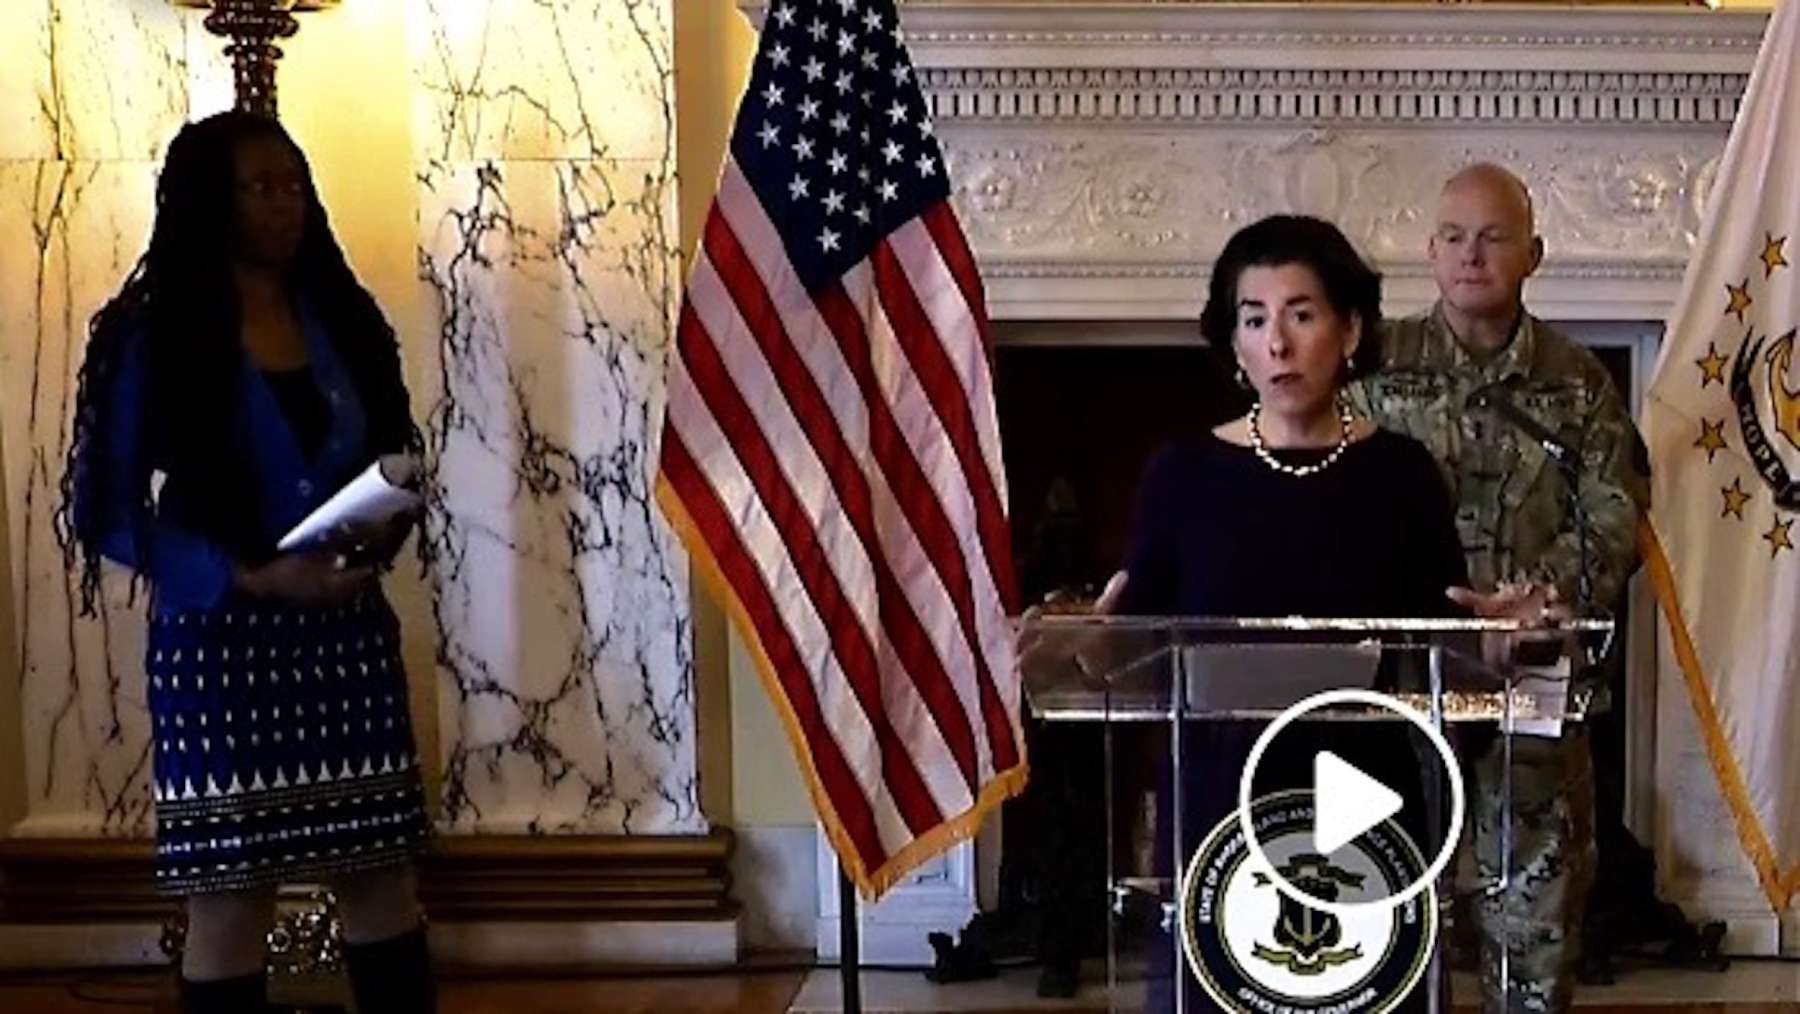 Rhode Island News: Reducing prison population not necessary at this time, says Governor Raimondo